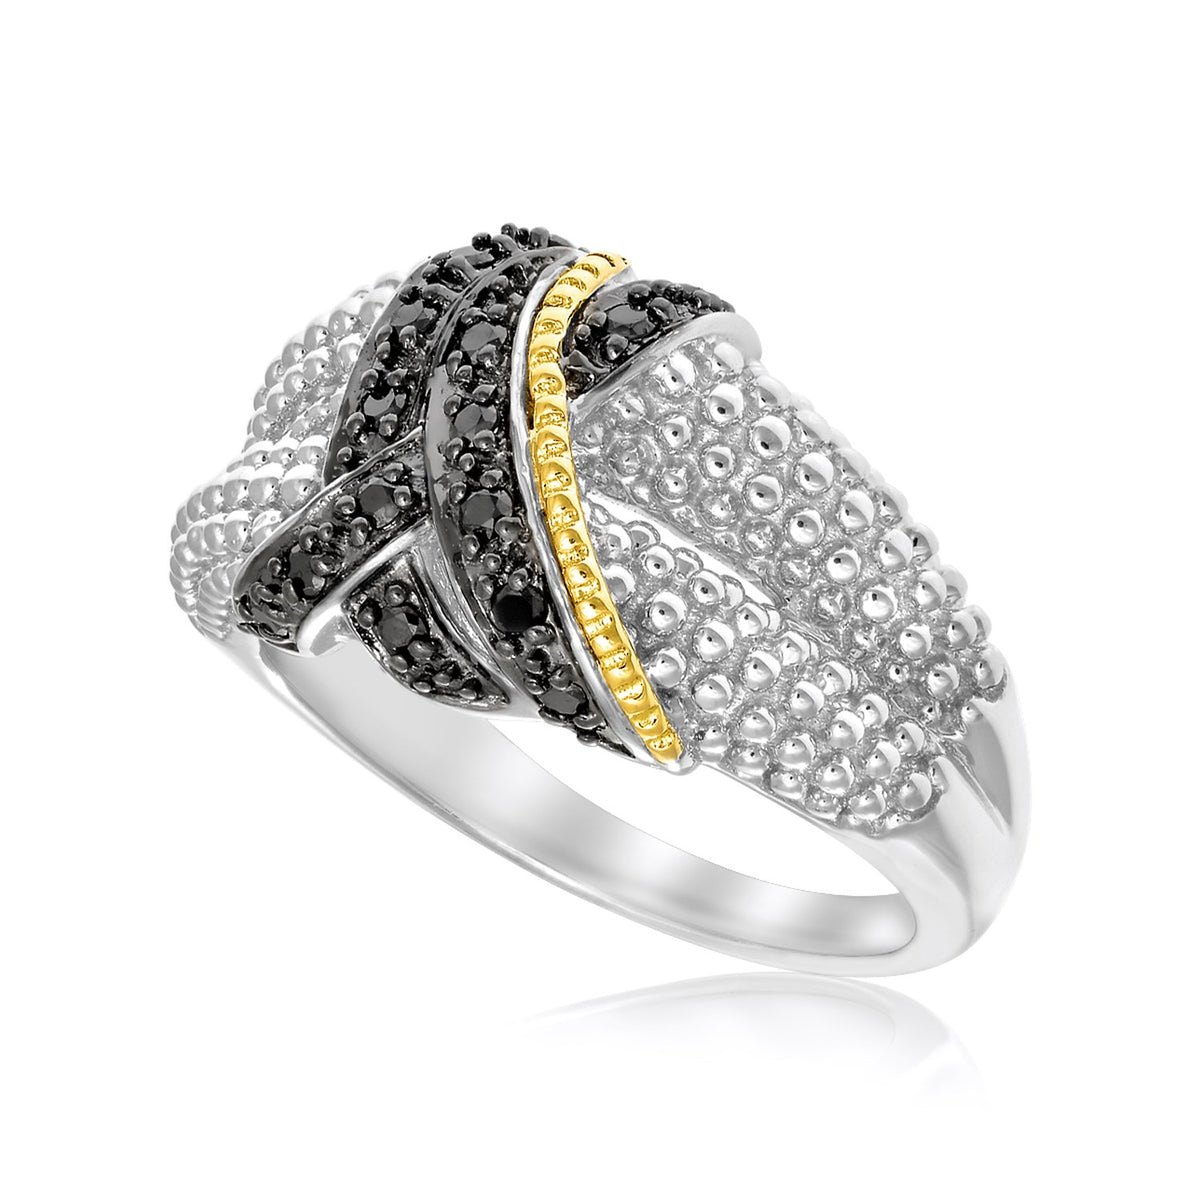 Entwined Popcorn Ring with Black Diamonds - 18k Yellow Gold & Sterling Silver